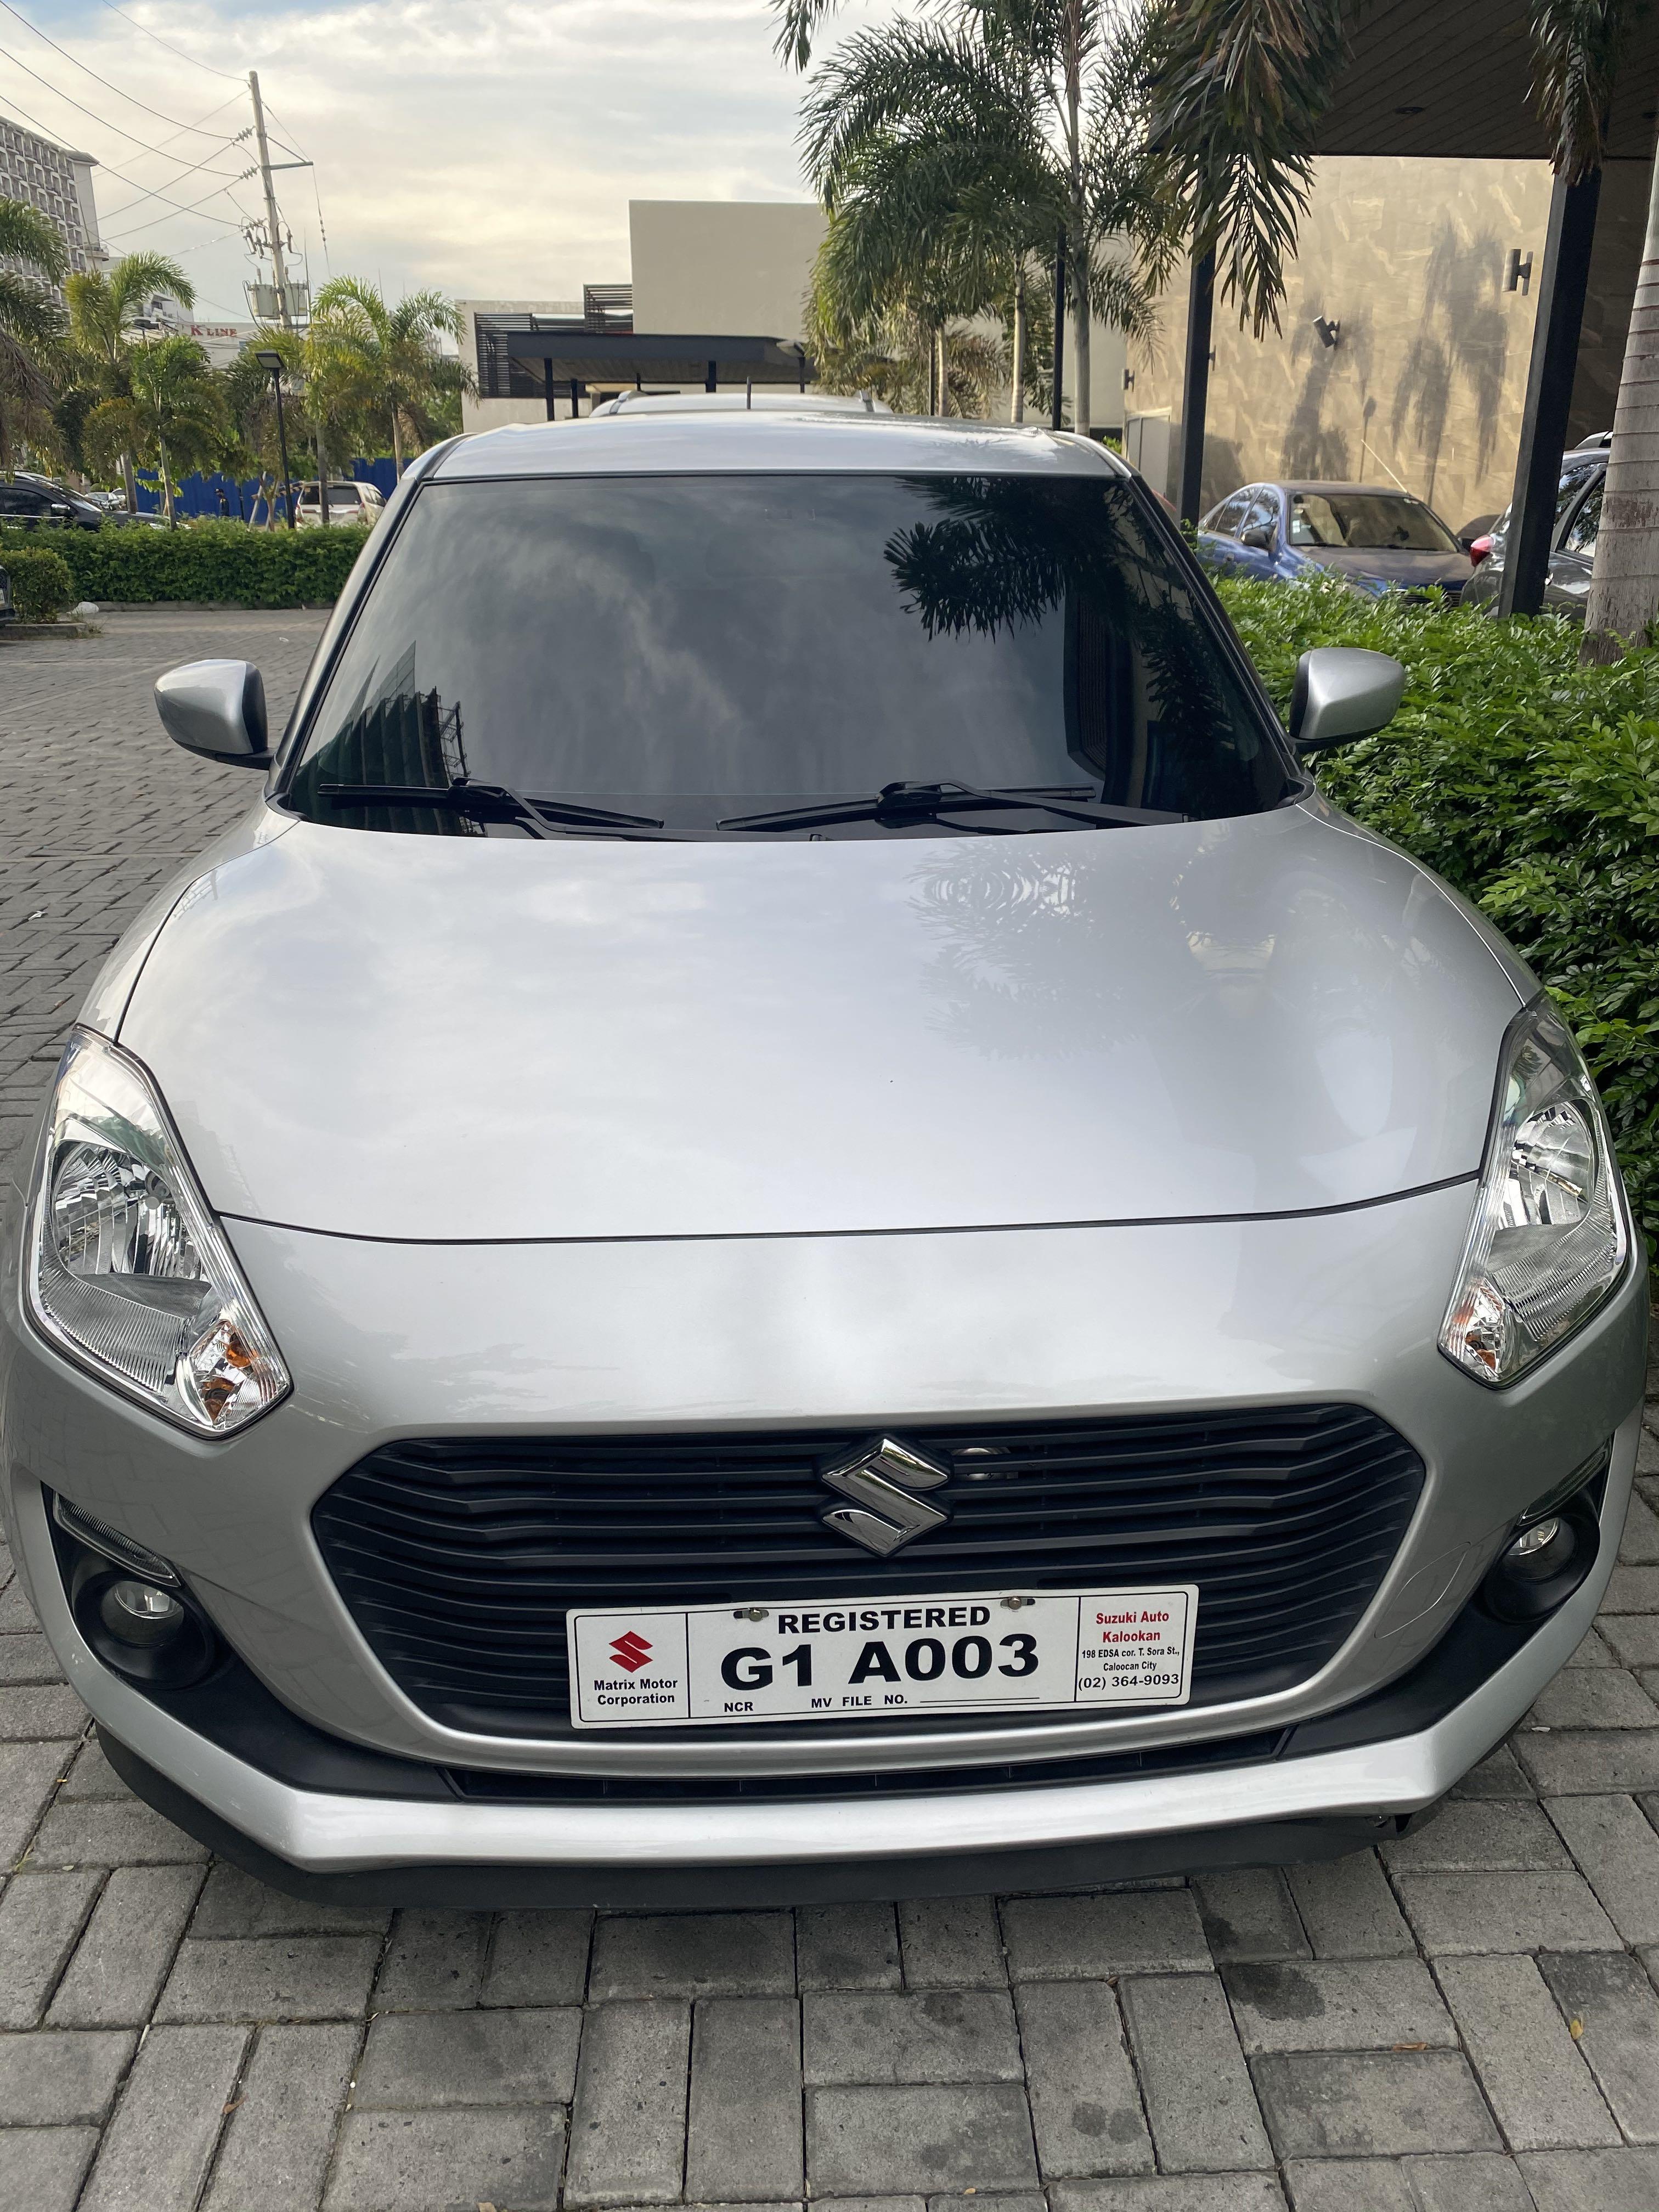 Suzuki Swift (A), Cars for Sale, Cars on Carousell